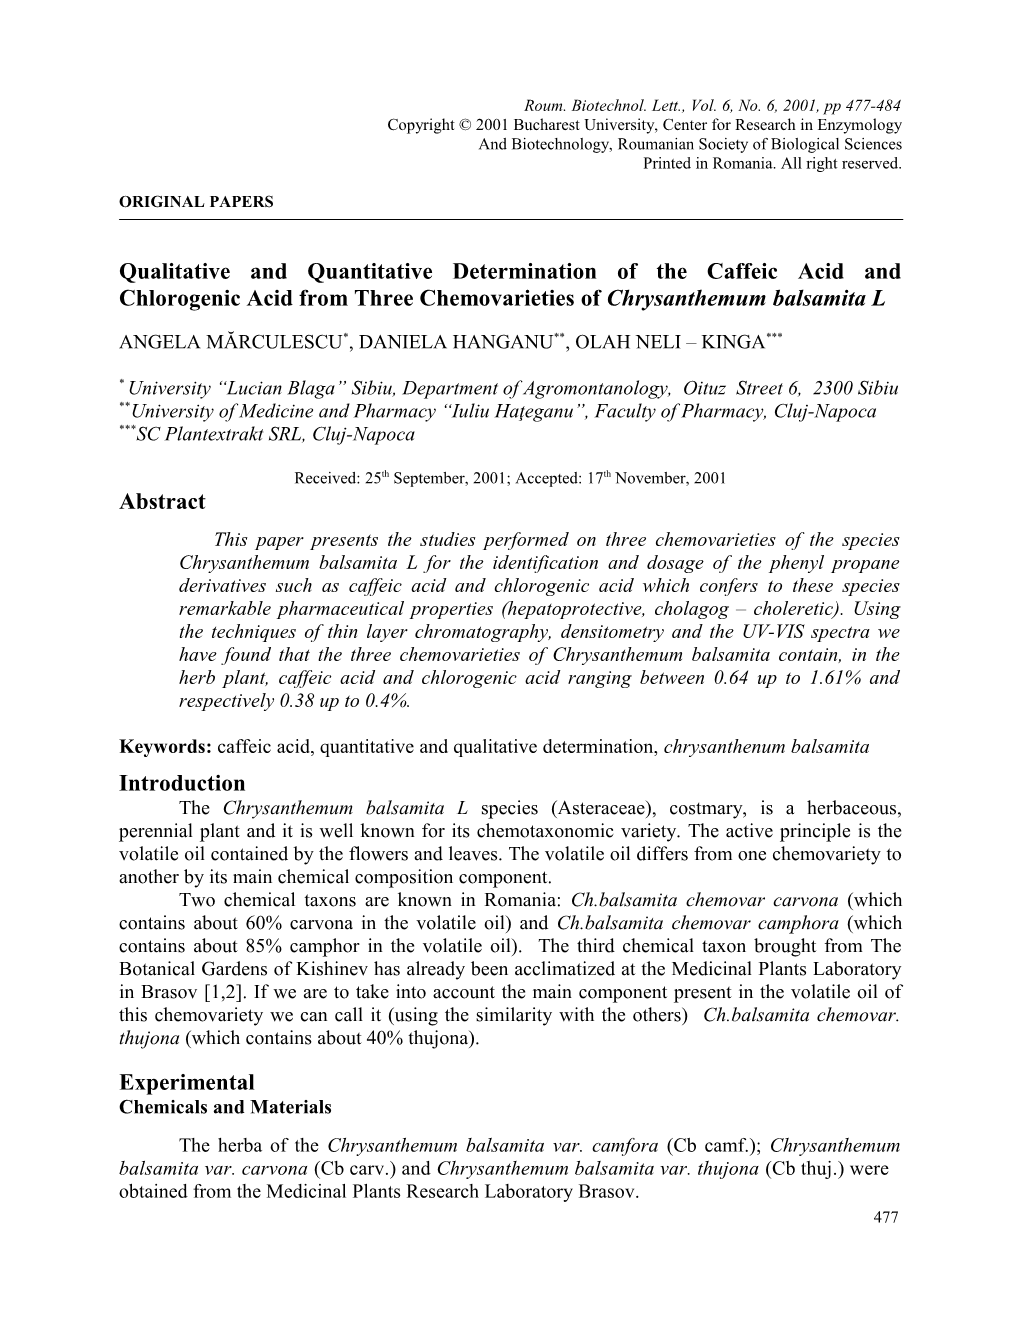 Qualitative and Quantitative Determination of the Caffeic Acid and Chlorogenic Acid From